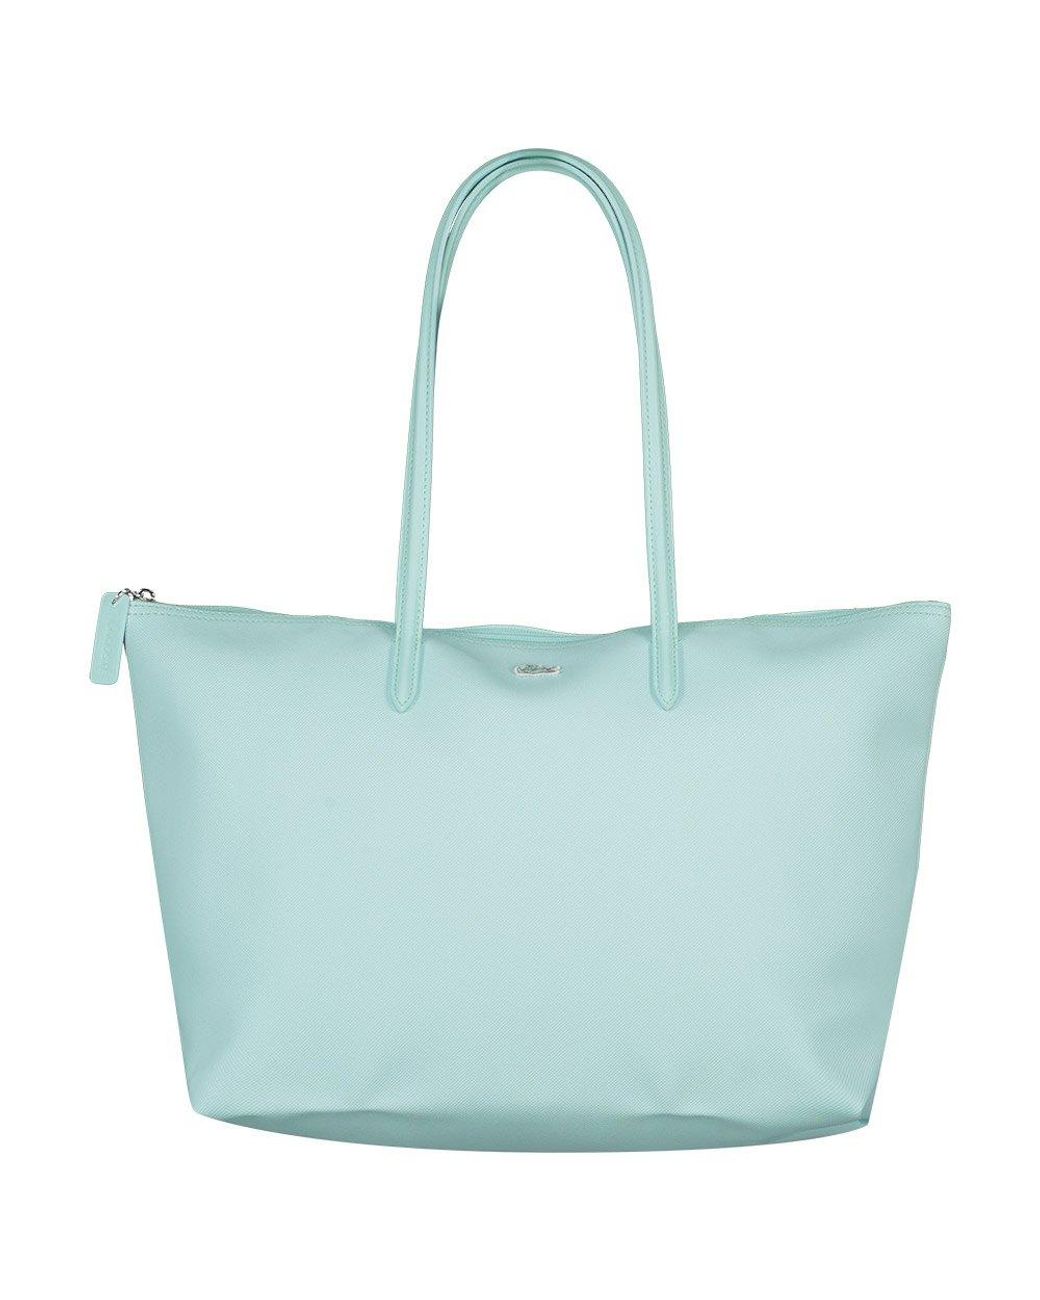 Lacoste Nf1888po Tote Bag in Blue | Lyst